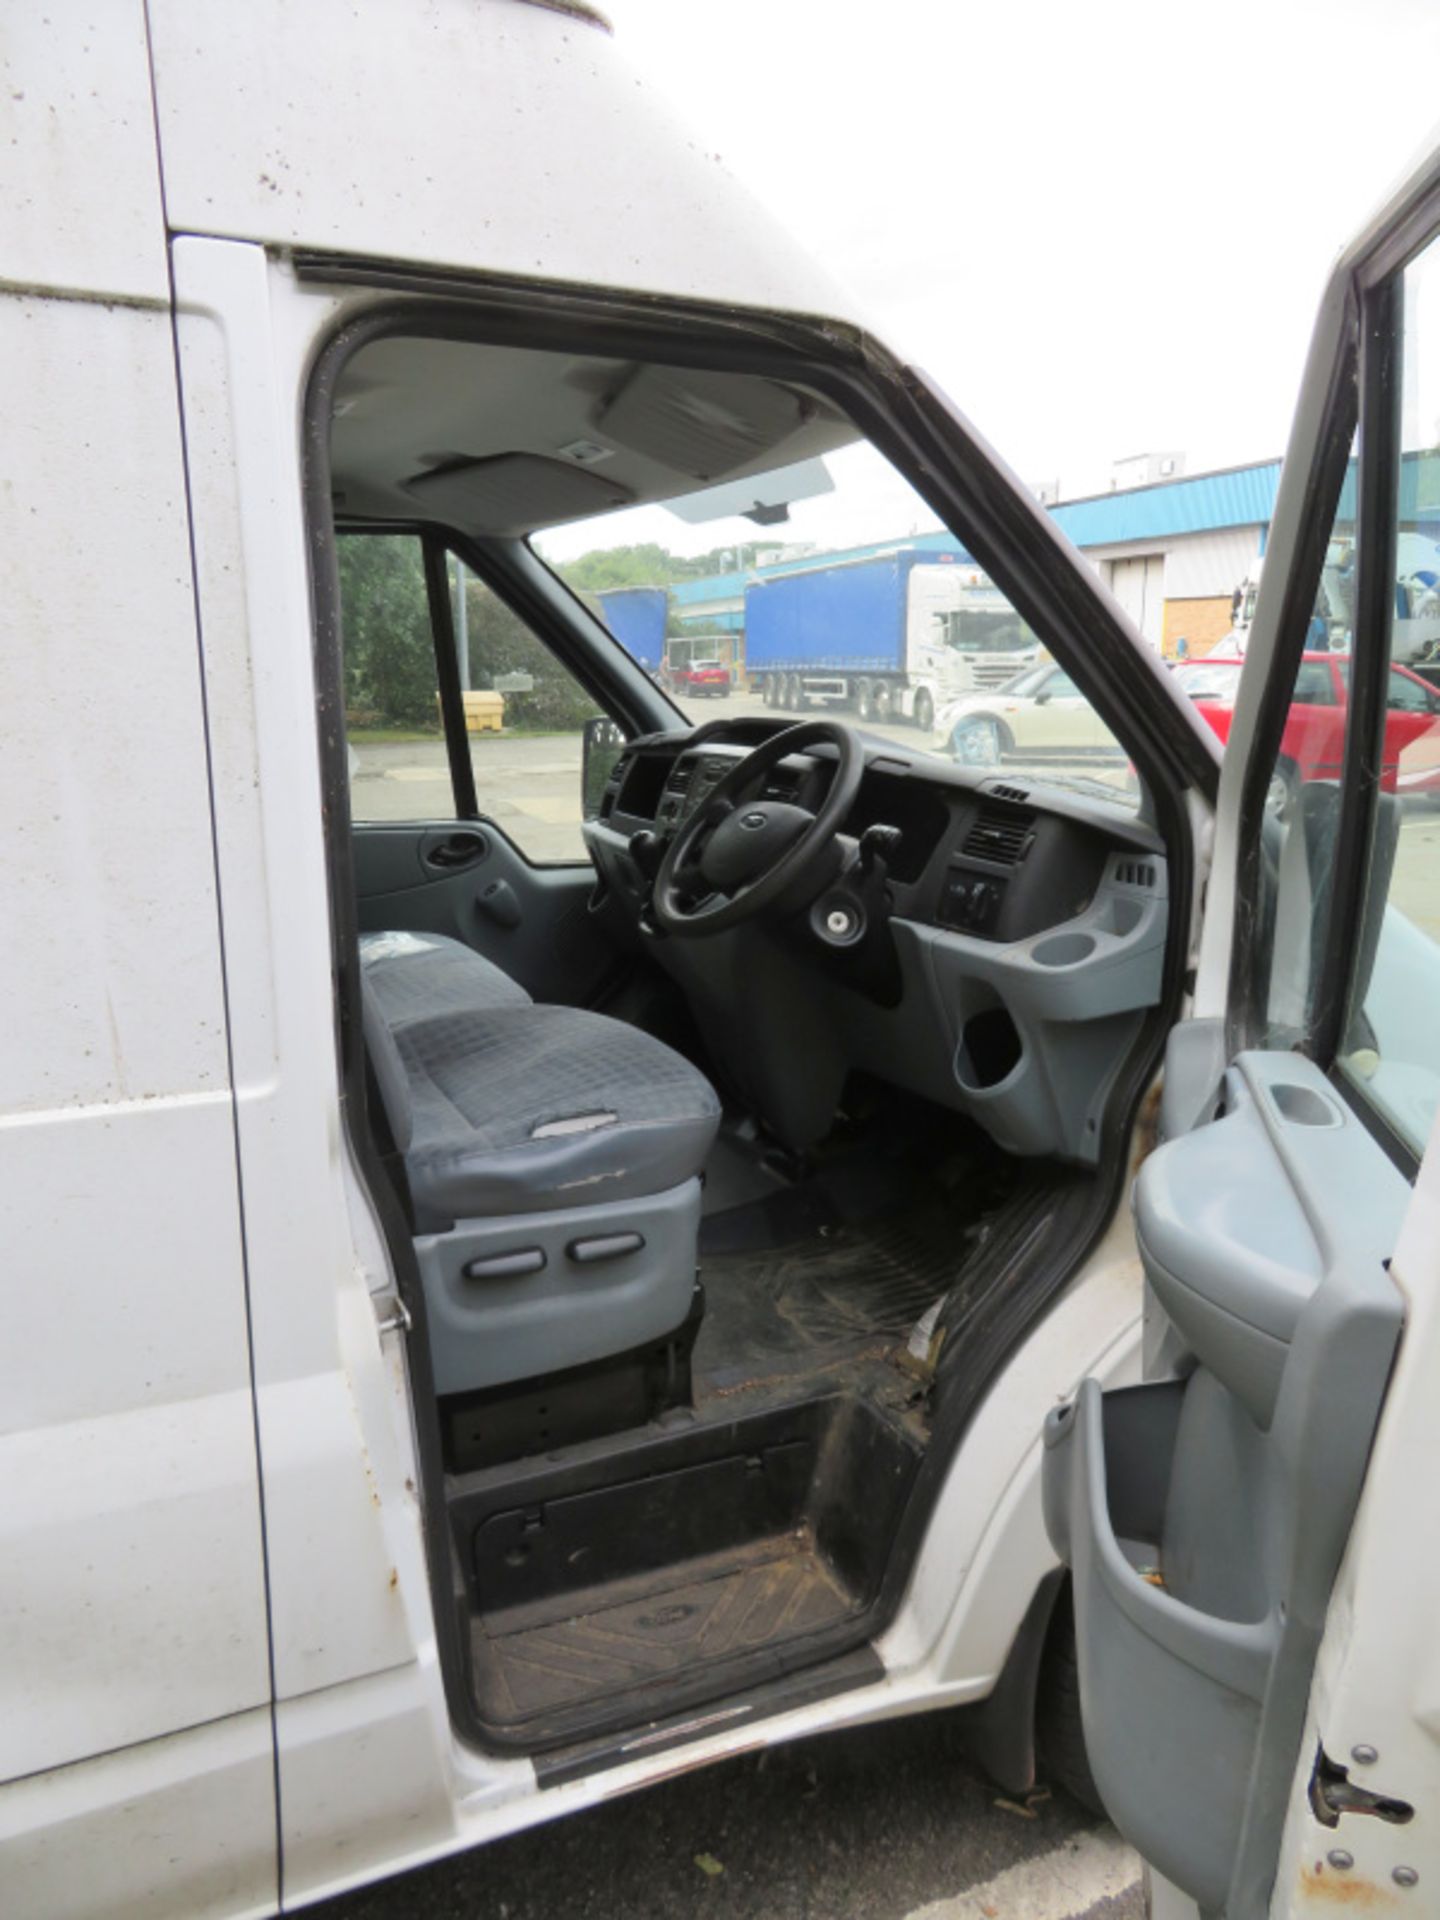 Ford Transit High Van Roof, Petrol, Mileage 33357 mile, Air conditioning, Runs & drives well on - Image 5 of 21